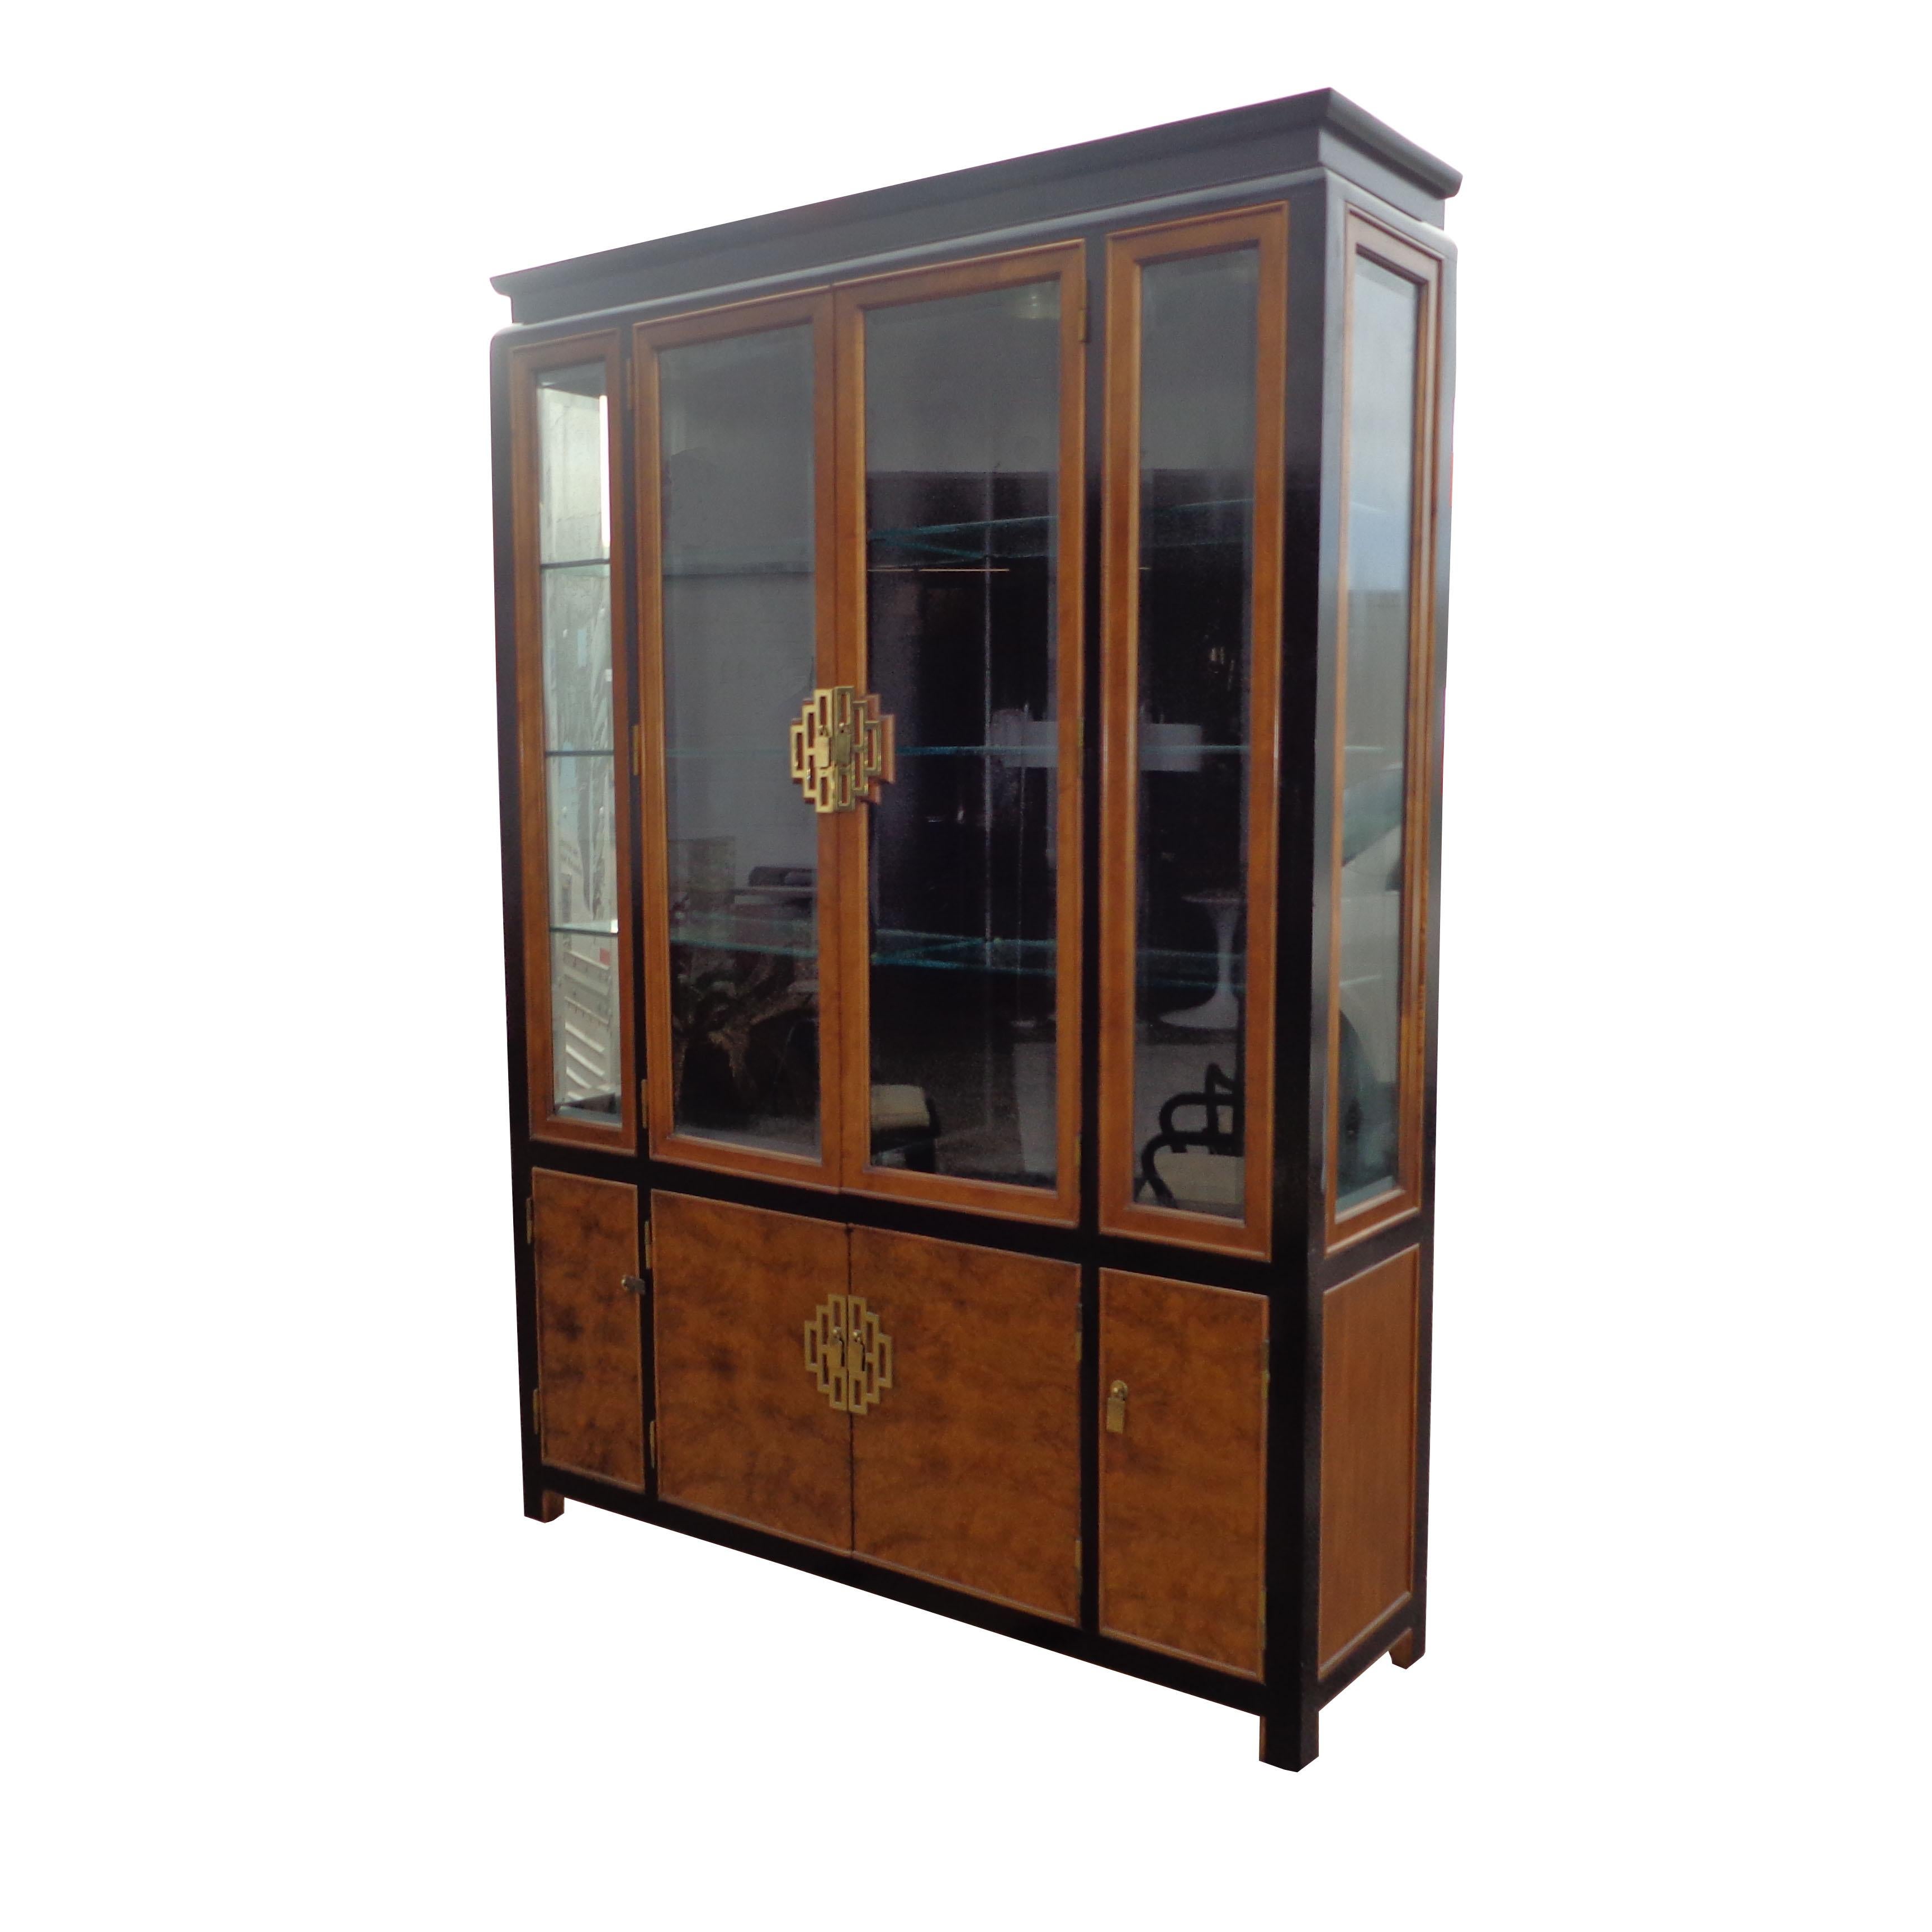 Chin Hua display cabinet by Raymond Sobota for Century Furniture

 Raymond K. Sobota started designing for Century Furniture in 1952, and was with the company for forty years.
 
Burlwood with ebonized maple accents, brass hardware, glass shelves and